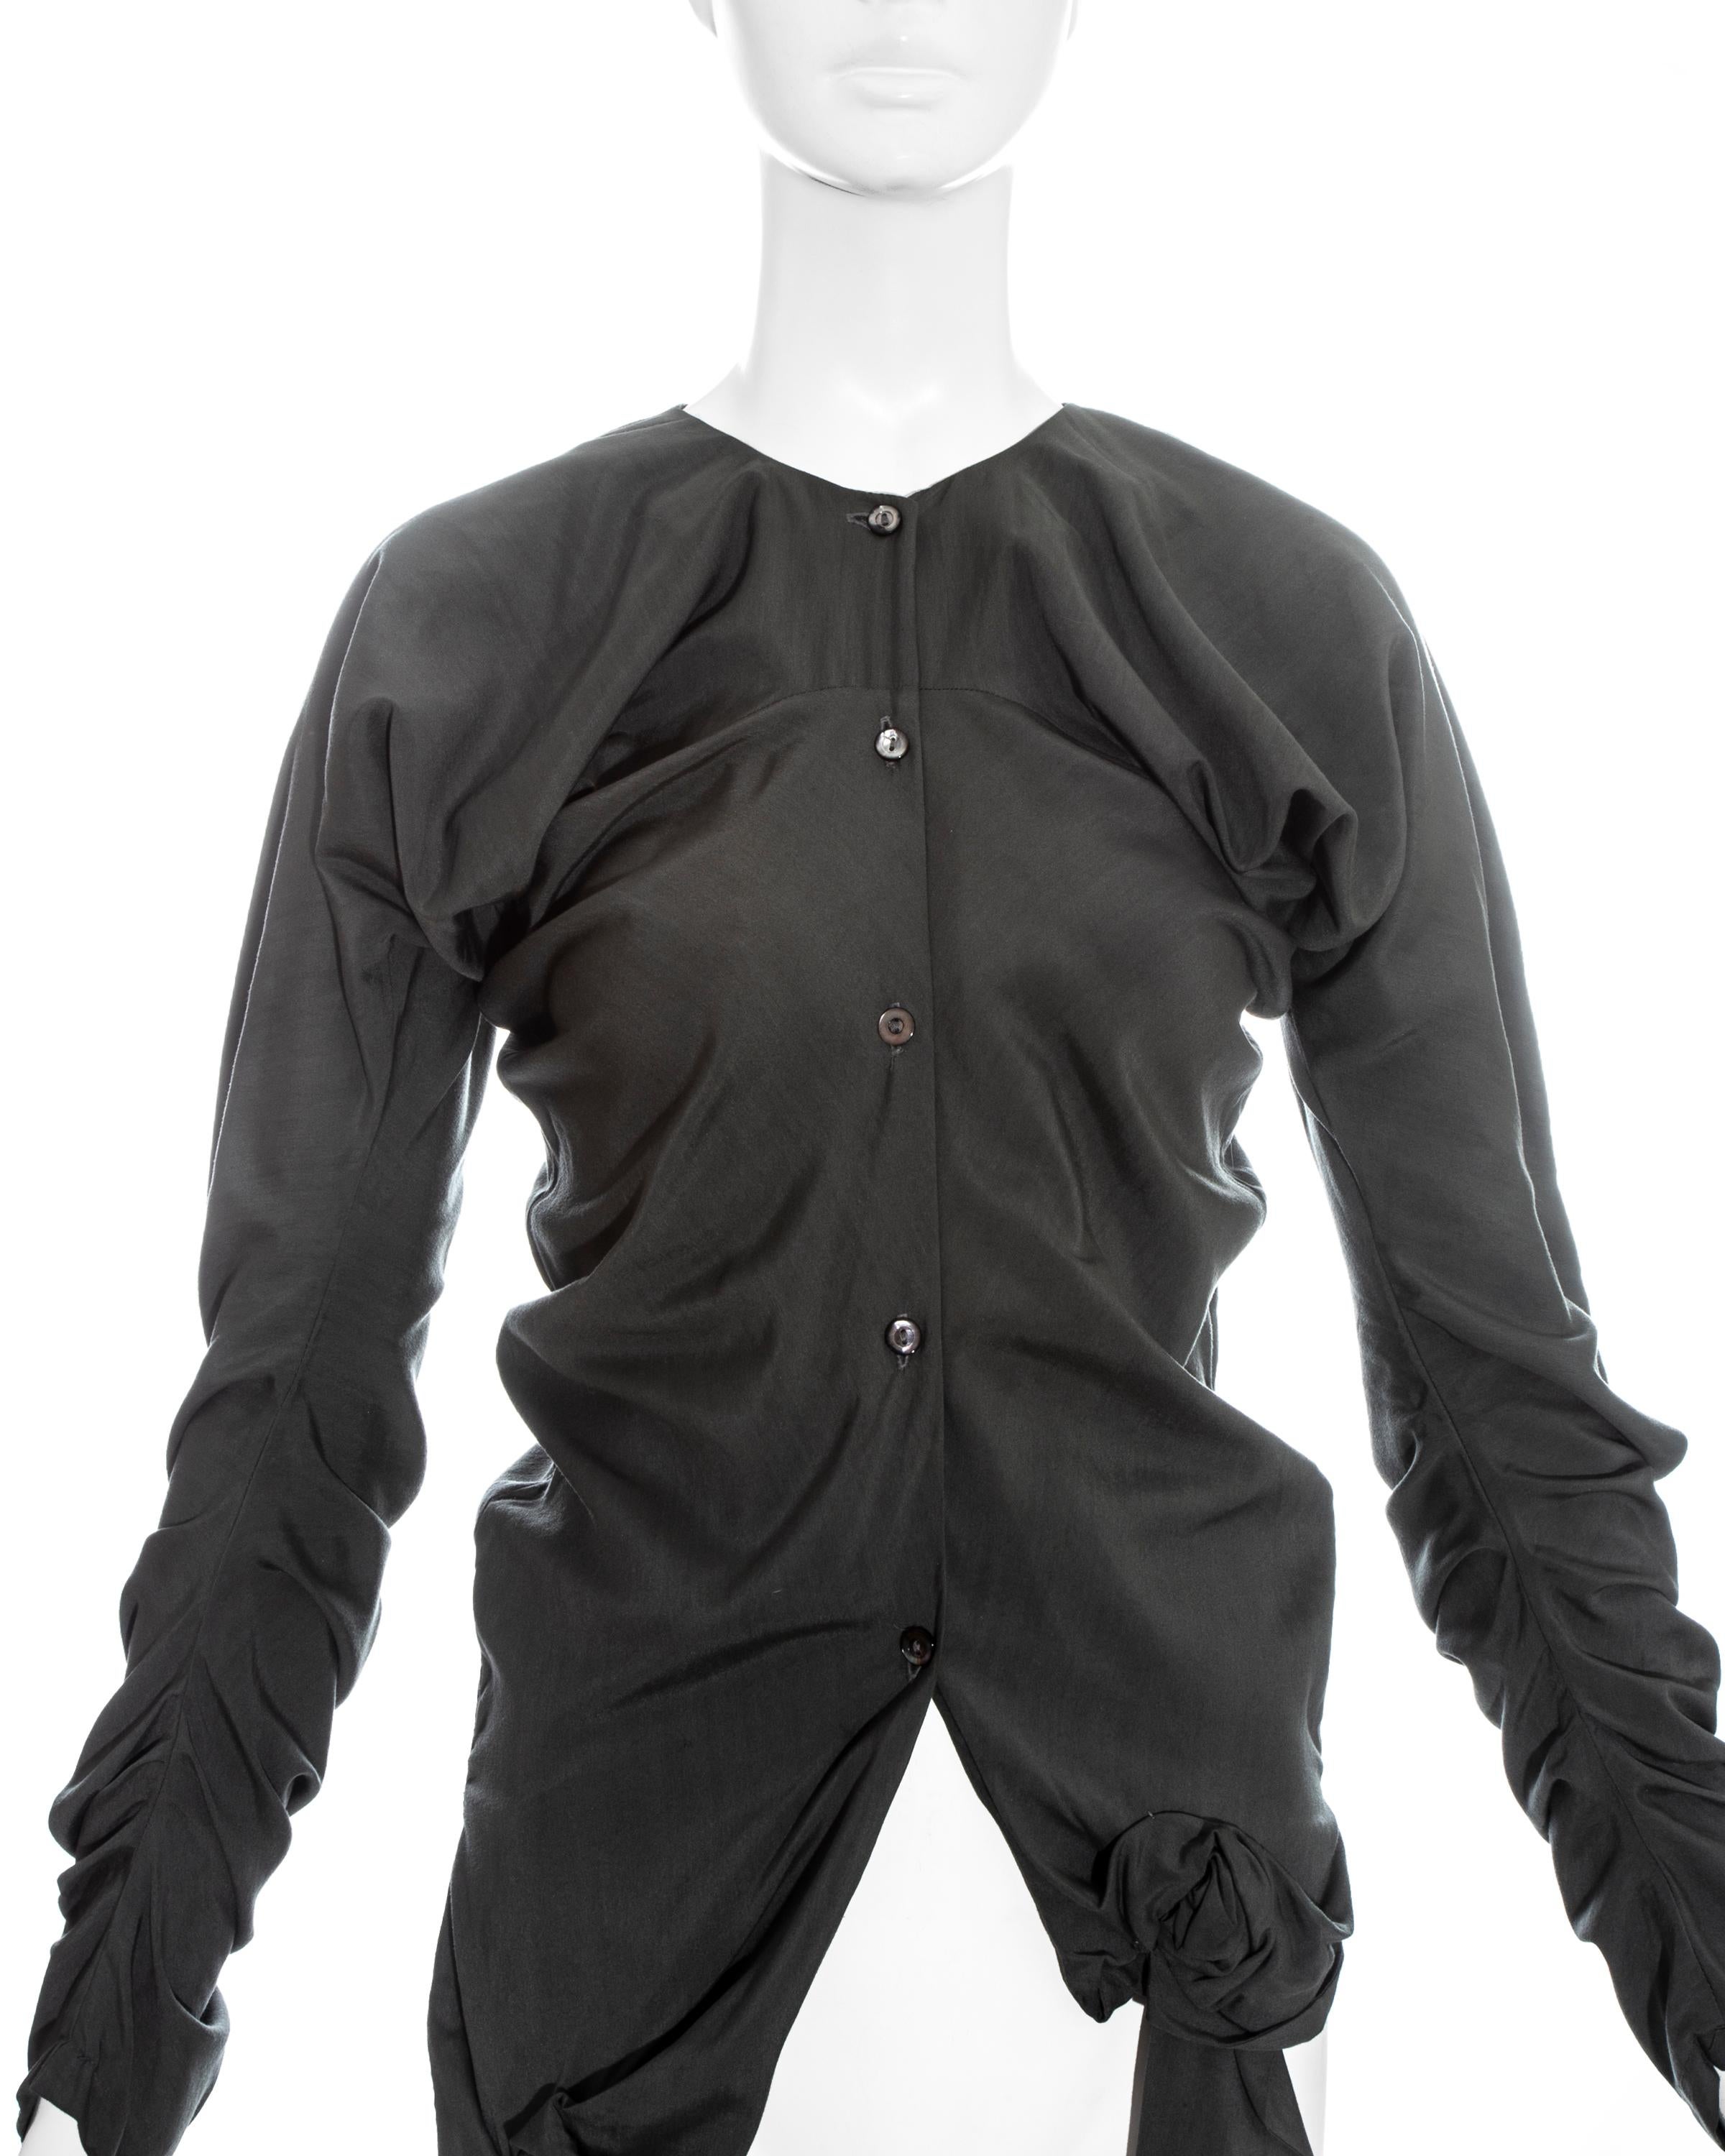 John Galliano very early gathered grey blouse

Fall-winter 1987

Measurements:

Shoulder to shoulder 18